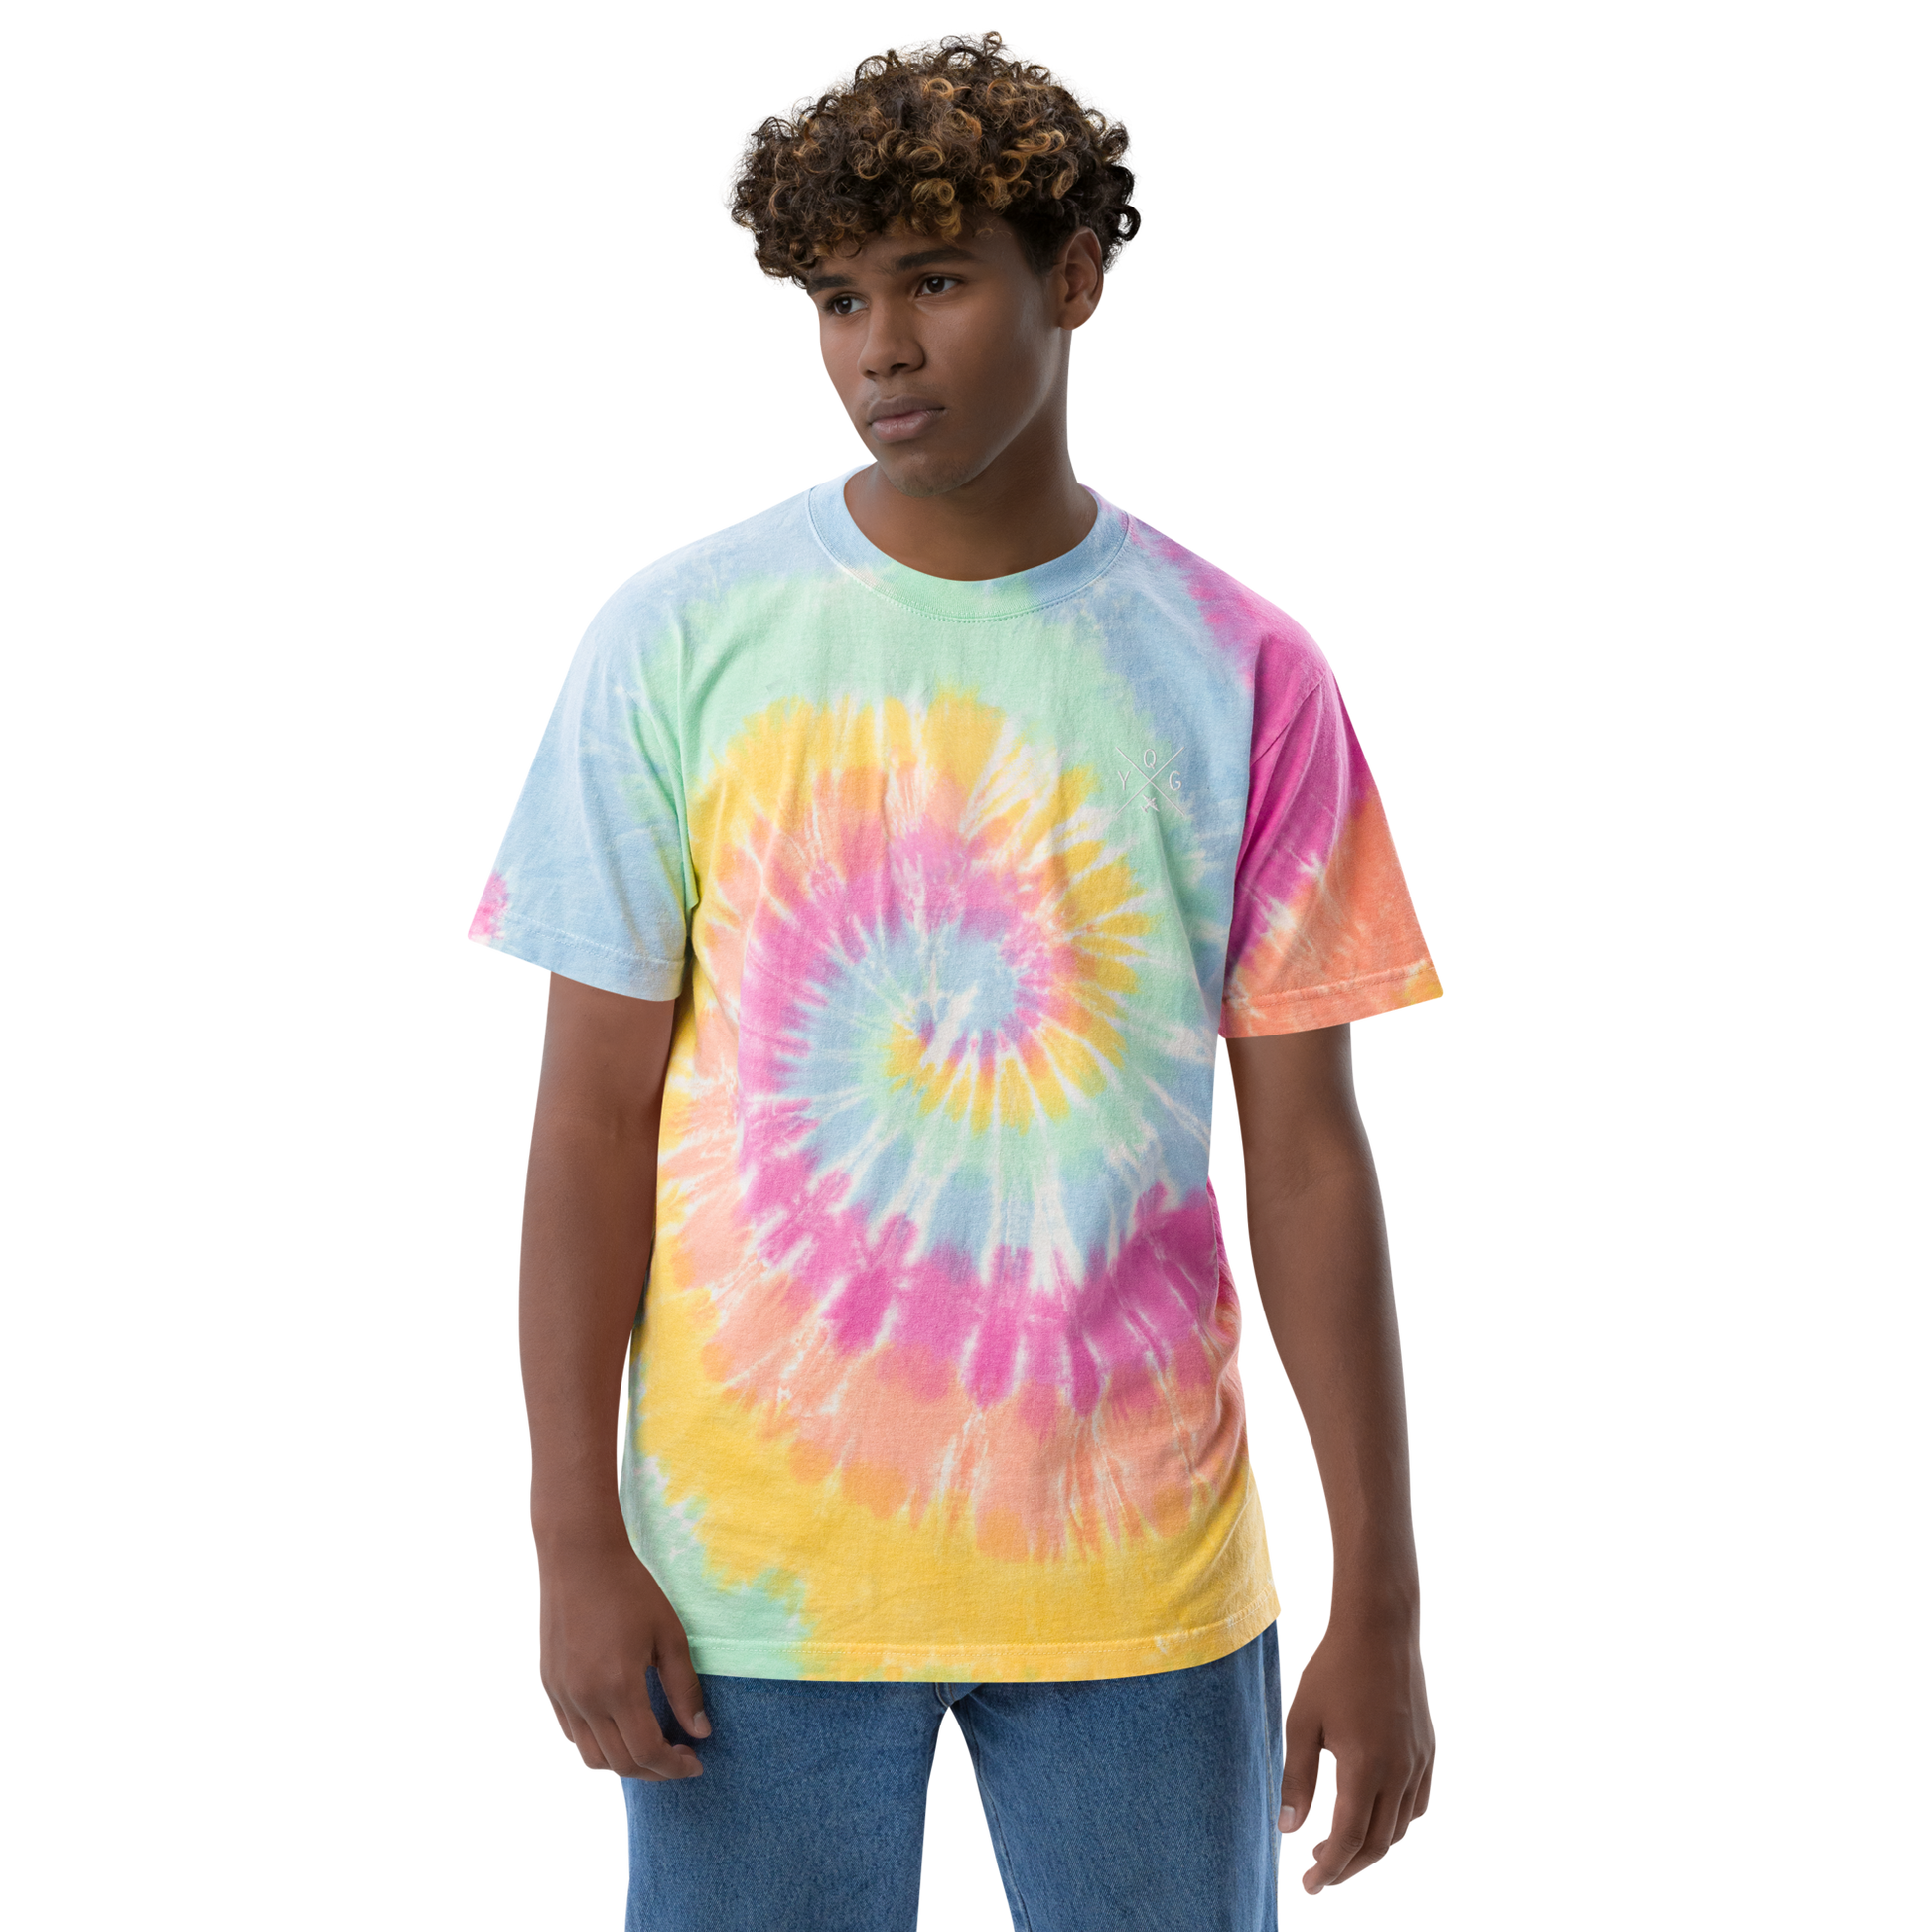 YHM Designs - YQG Windsor Oversized Tie-Dye T-Shirt - Crossed-X Design with Airport Code and Vintage Propliner - White Embroidery - Image 04